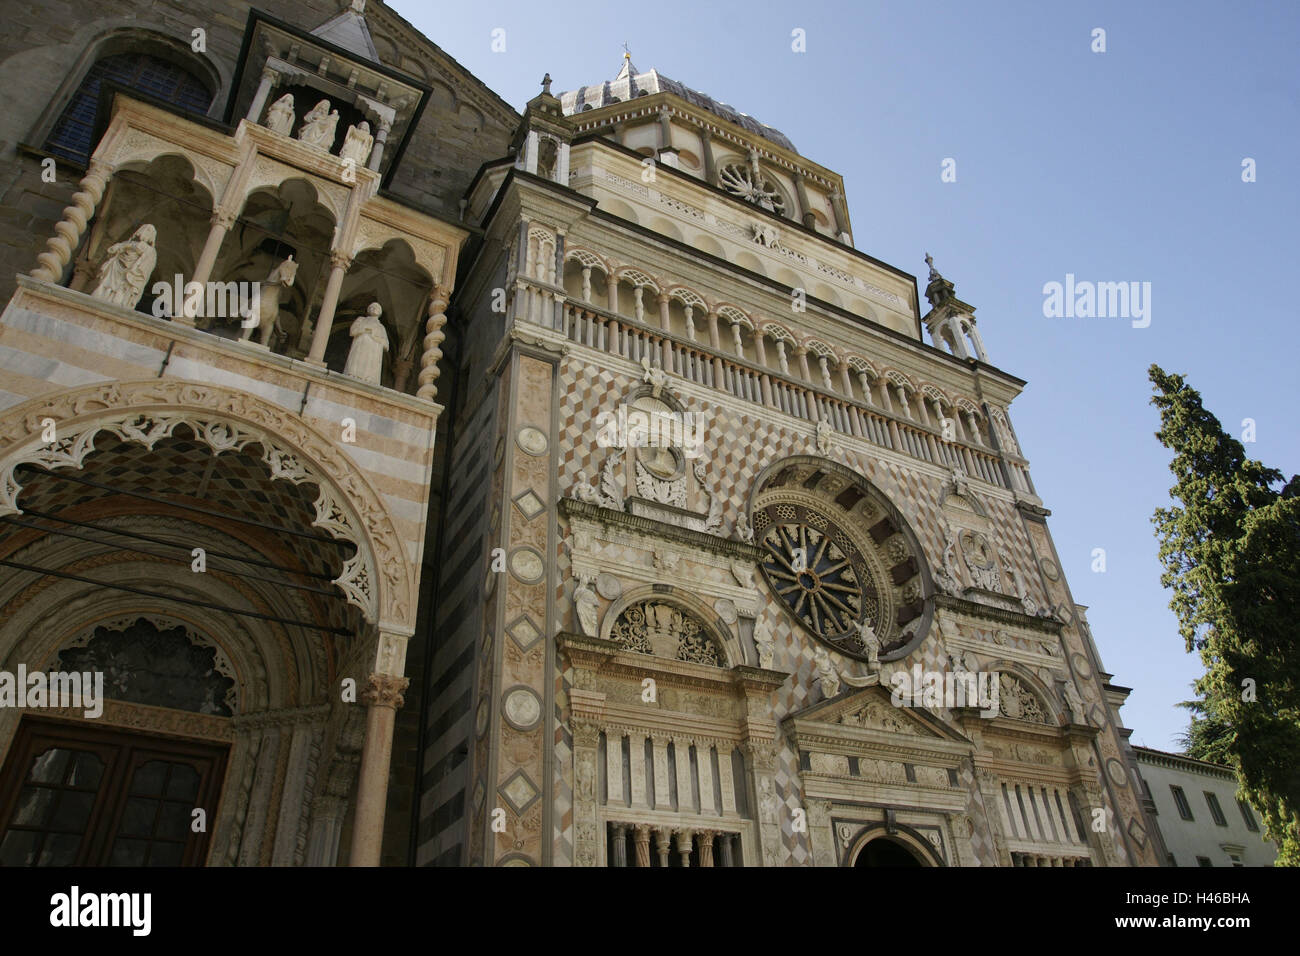 Italy, Lombardy, Bergamo, Città Alta, upper town, Piazza Vecchia, cathedral, town, townscape, historically, Old Town, building, outside, facade, church, place of interest, detail, Stock Photo